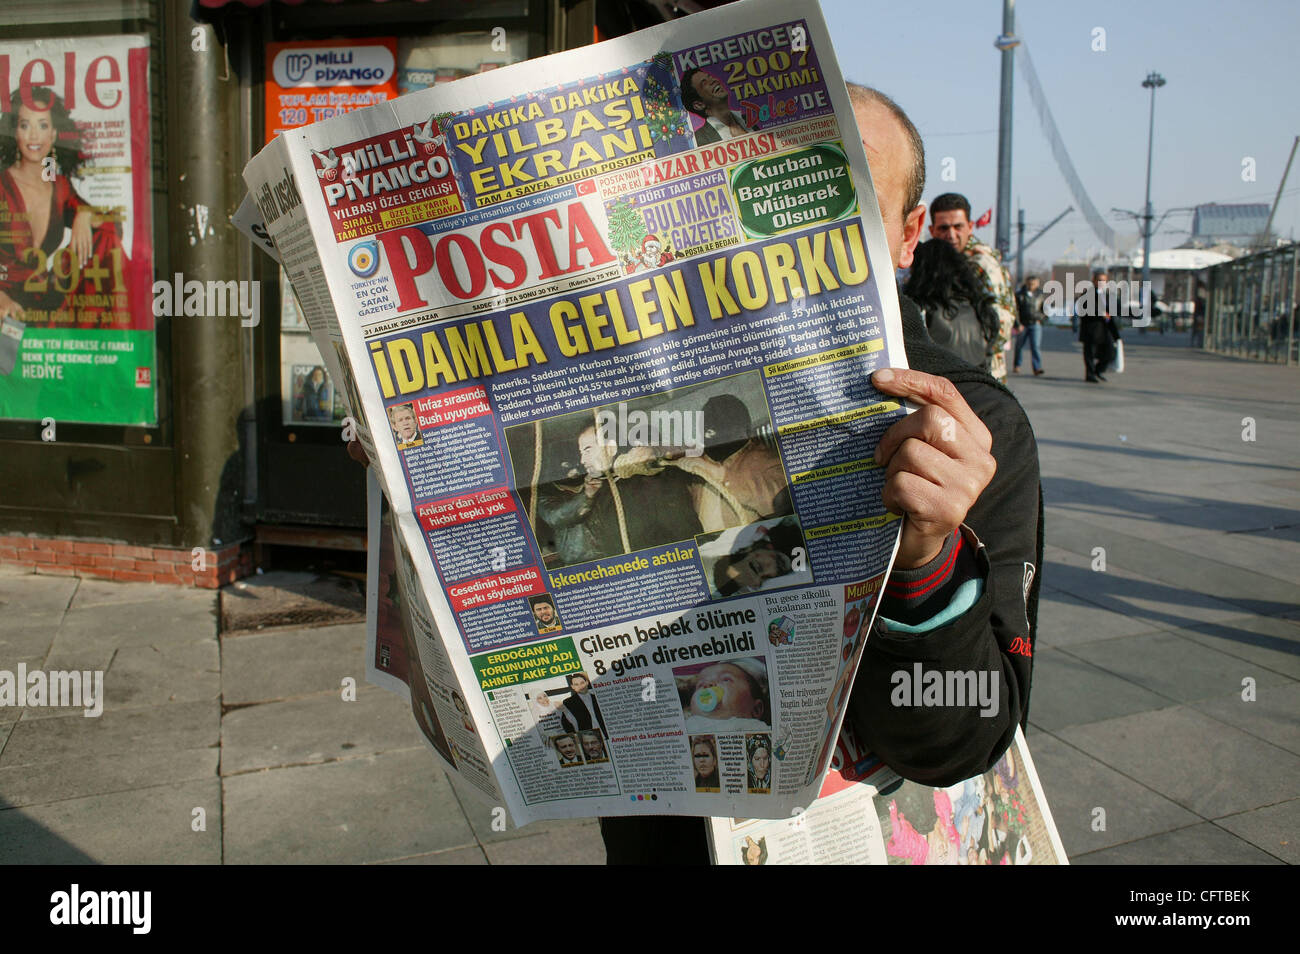 The front page of Turkey's Posta newspaper in Istanbul December 31 2006. The headline refers to the fear of violence after the execution,  and shows Saddam Hussein before his hanging yesterday in Baghdad, for crimes against humanity. Stock Photo